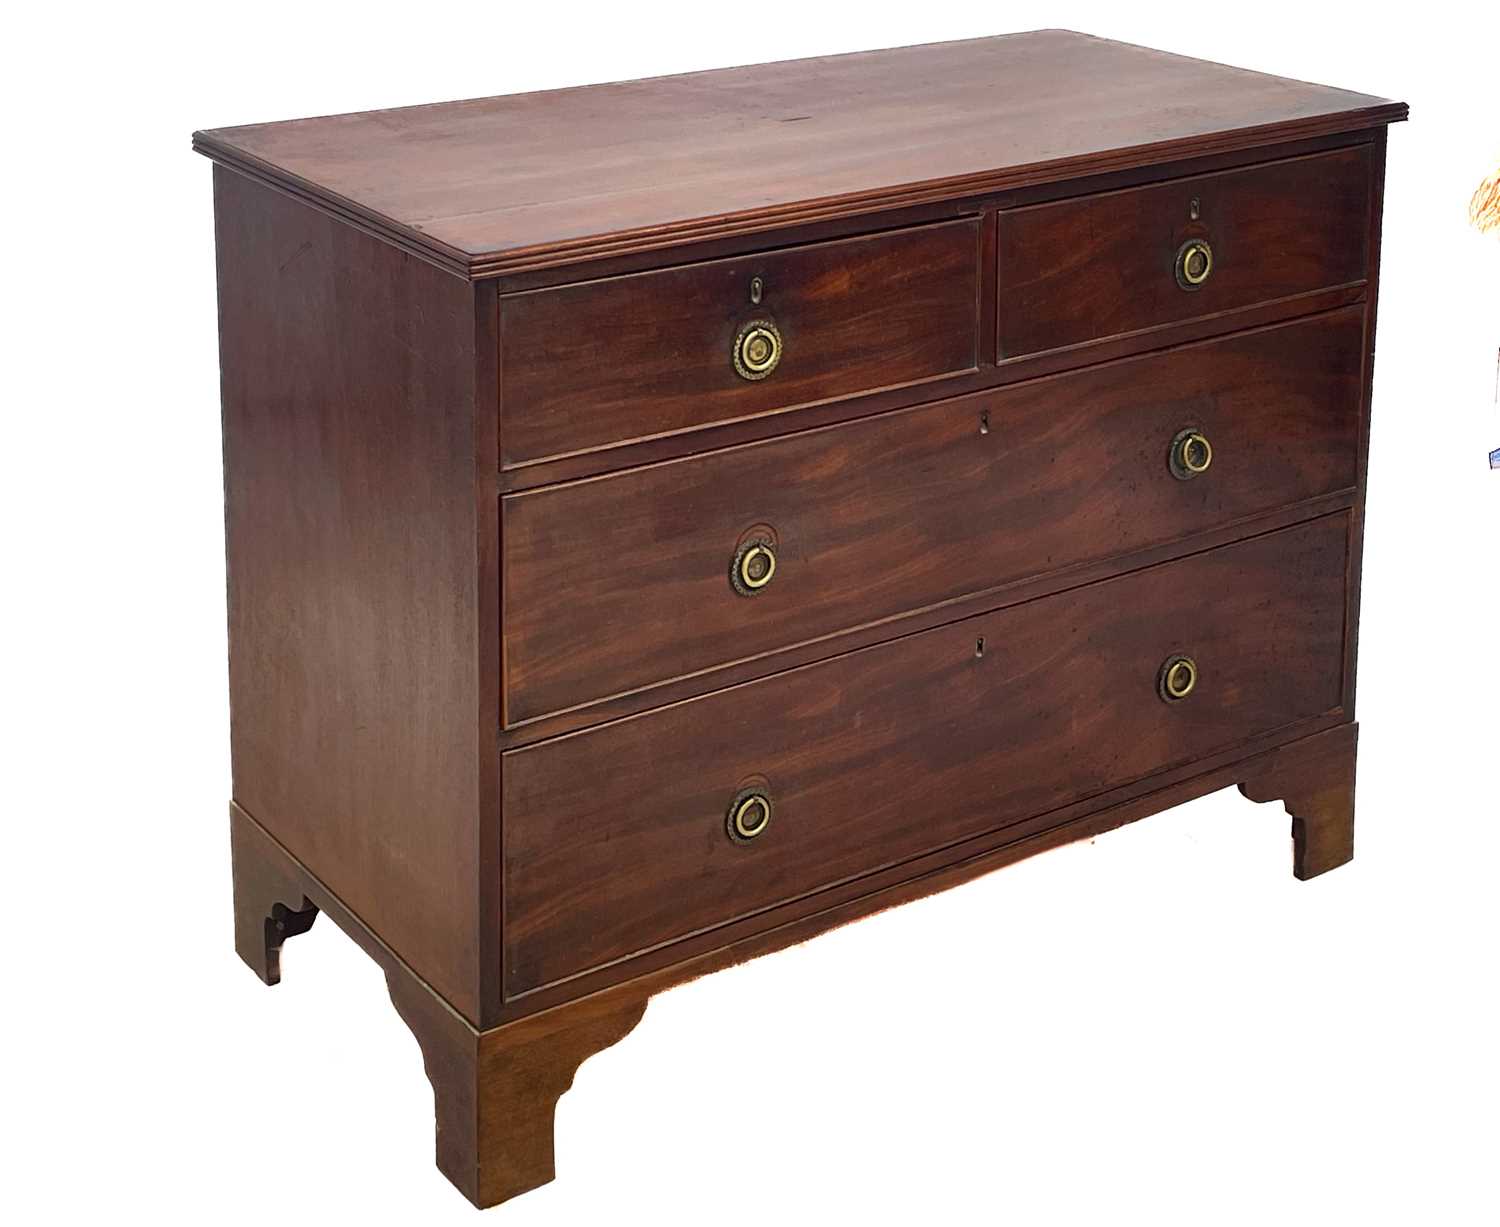 A 19th century mahogany chest of drawers. - Image 2 of 3